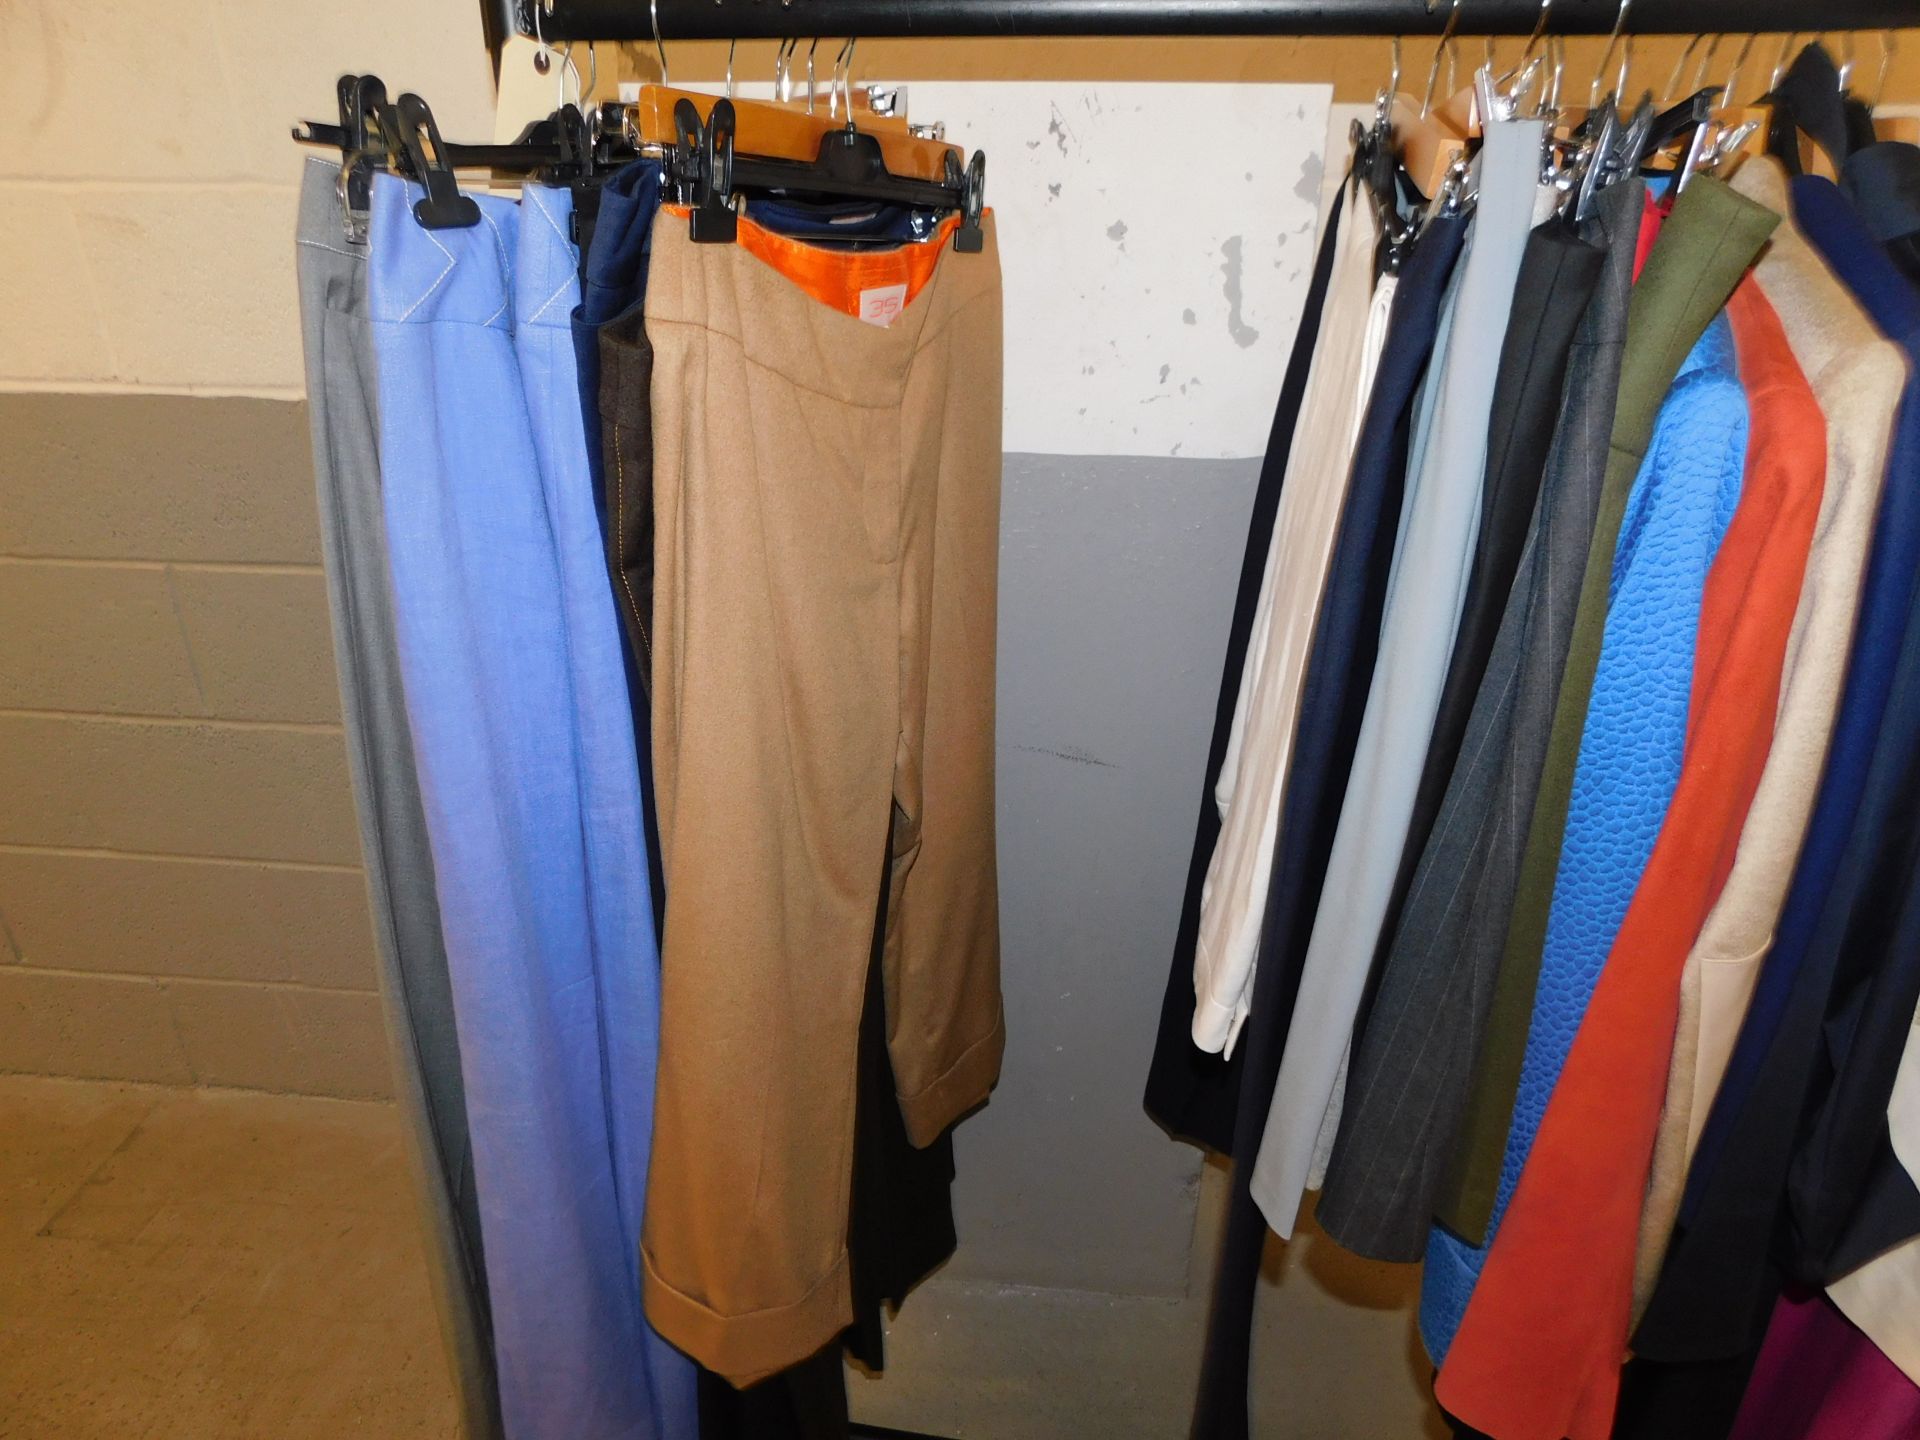 Contents of Rail of "Number 35" Ladies Business Wear, Size 16 (7 Skirts, 8  Tops/Dresses, 6 Jackets, - Image 3 of 9